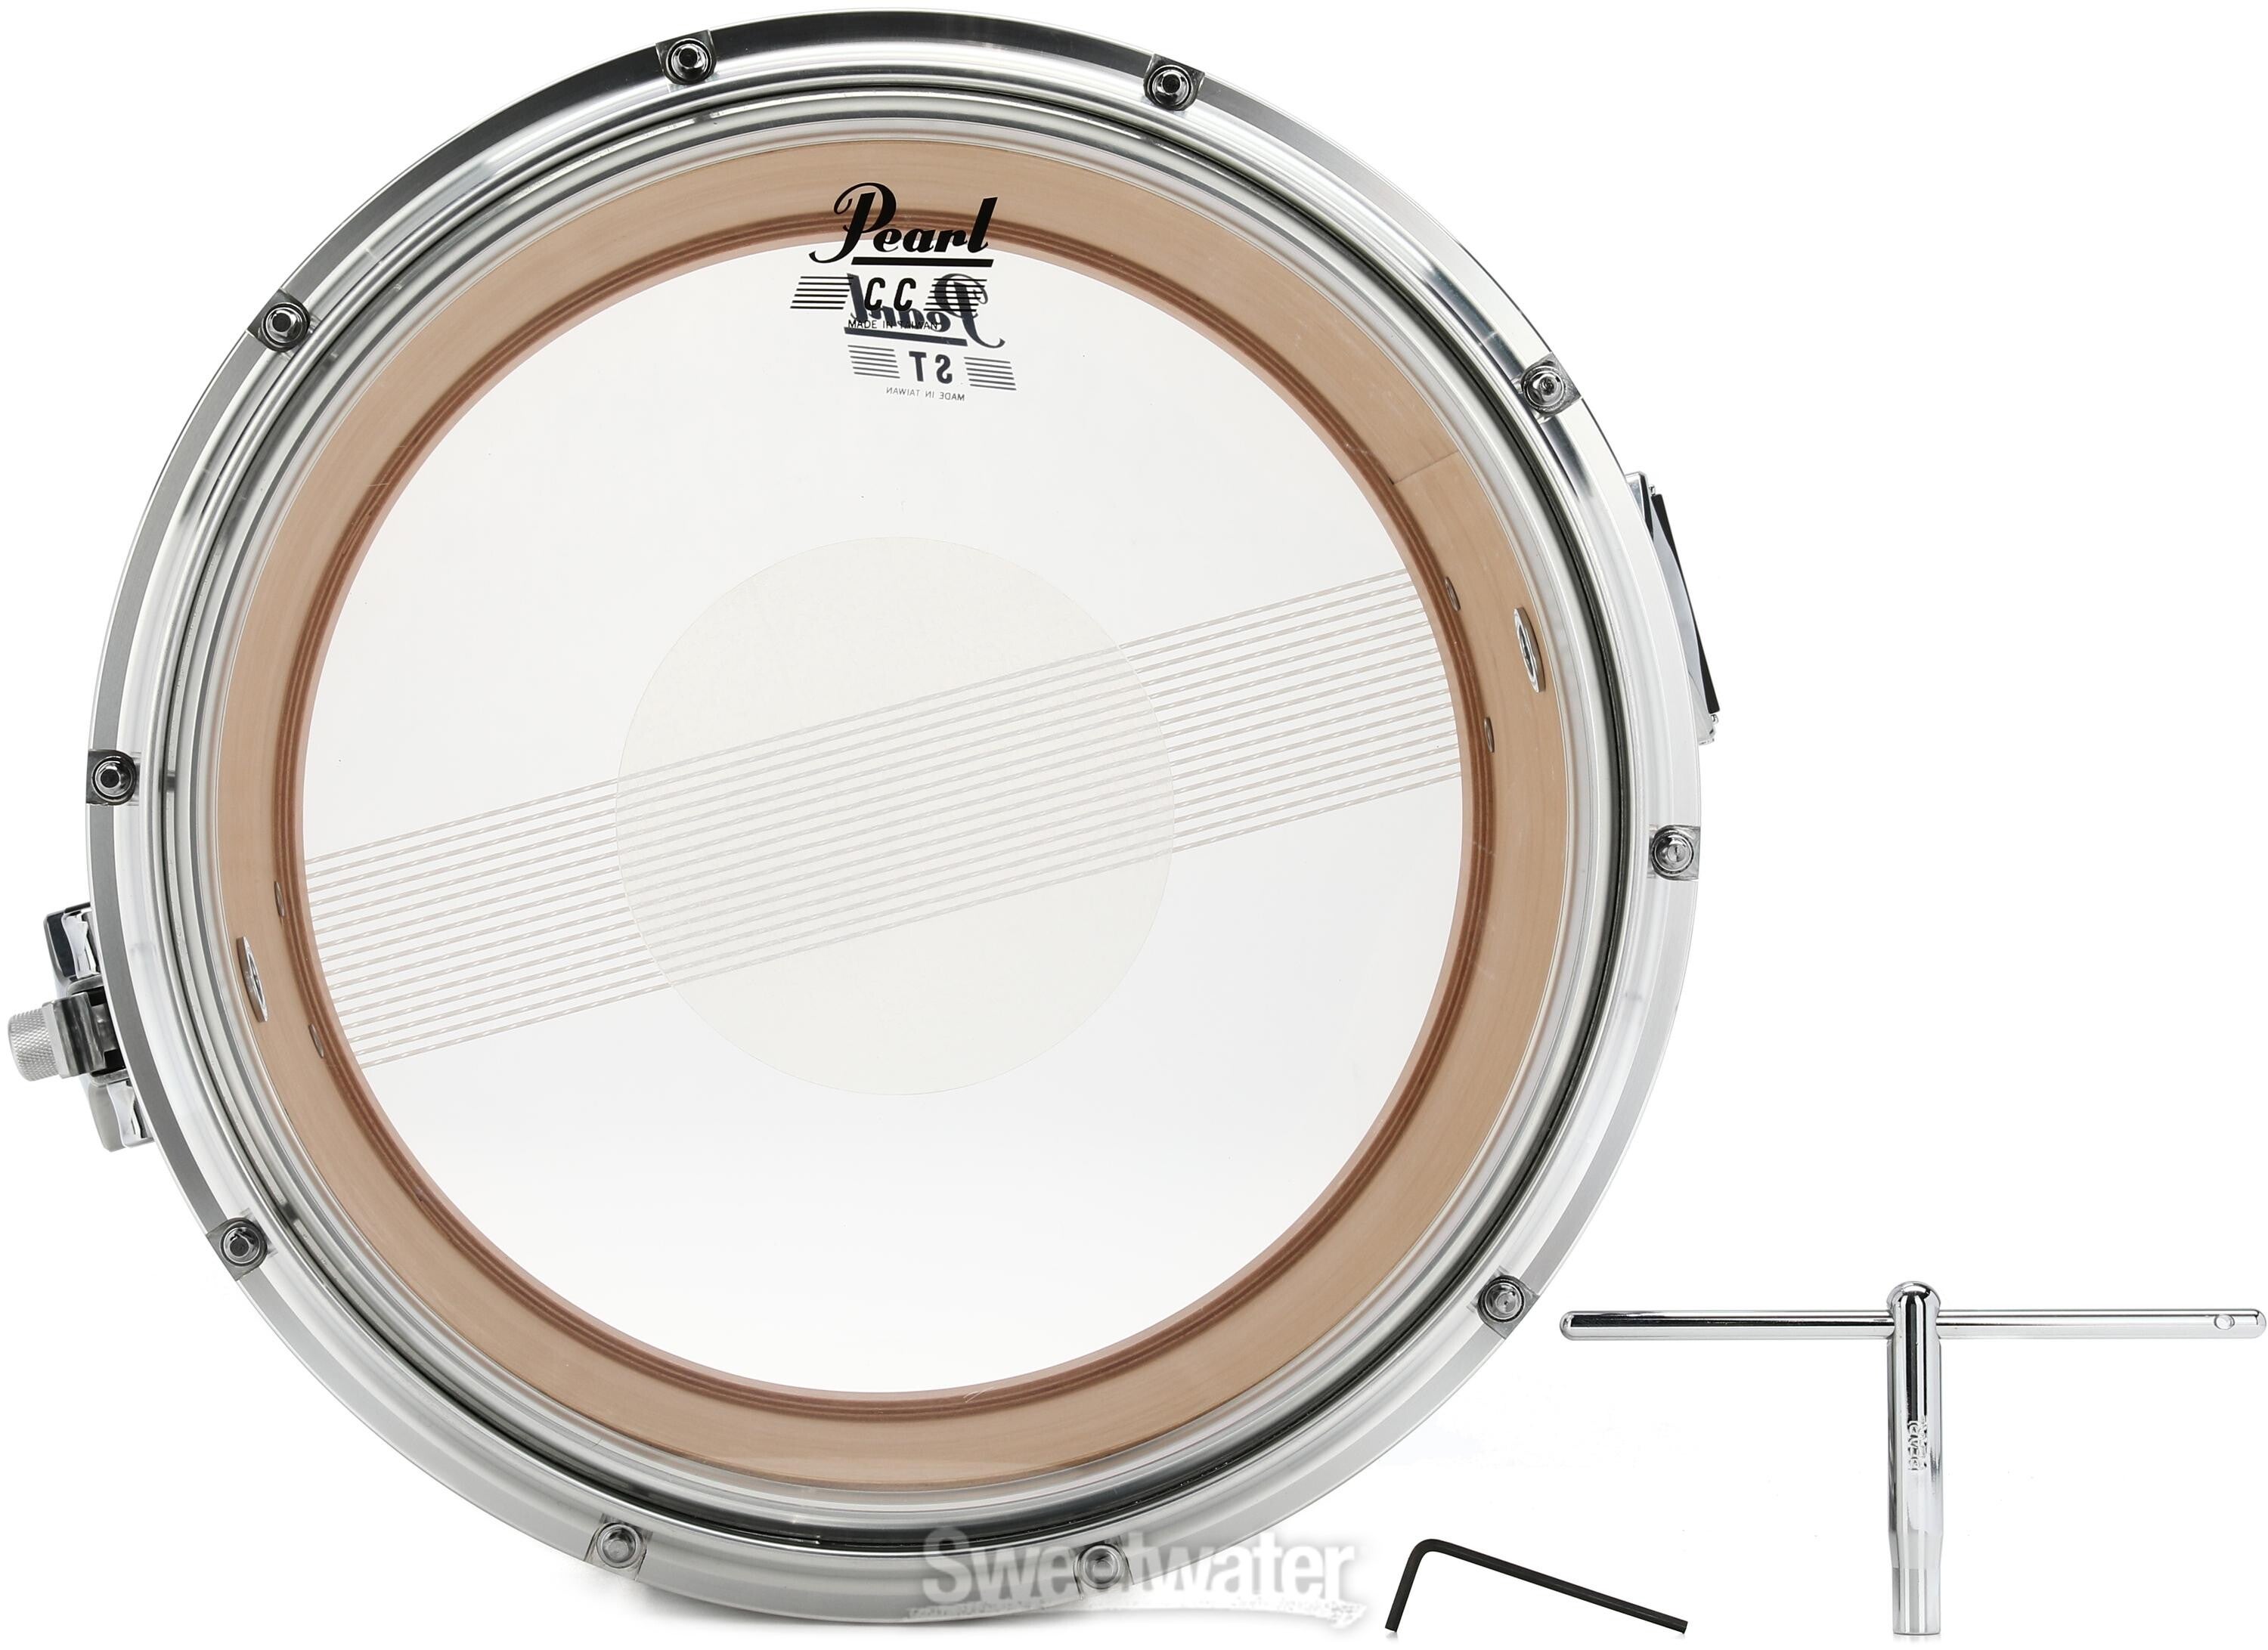 Pearl Championship Maple FFX Marching Snare Drum - 13 x 11 inch 